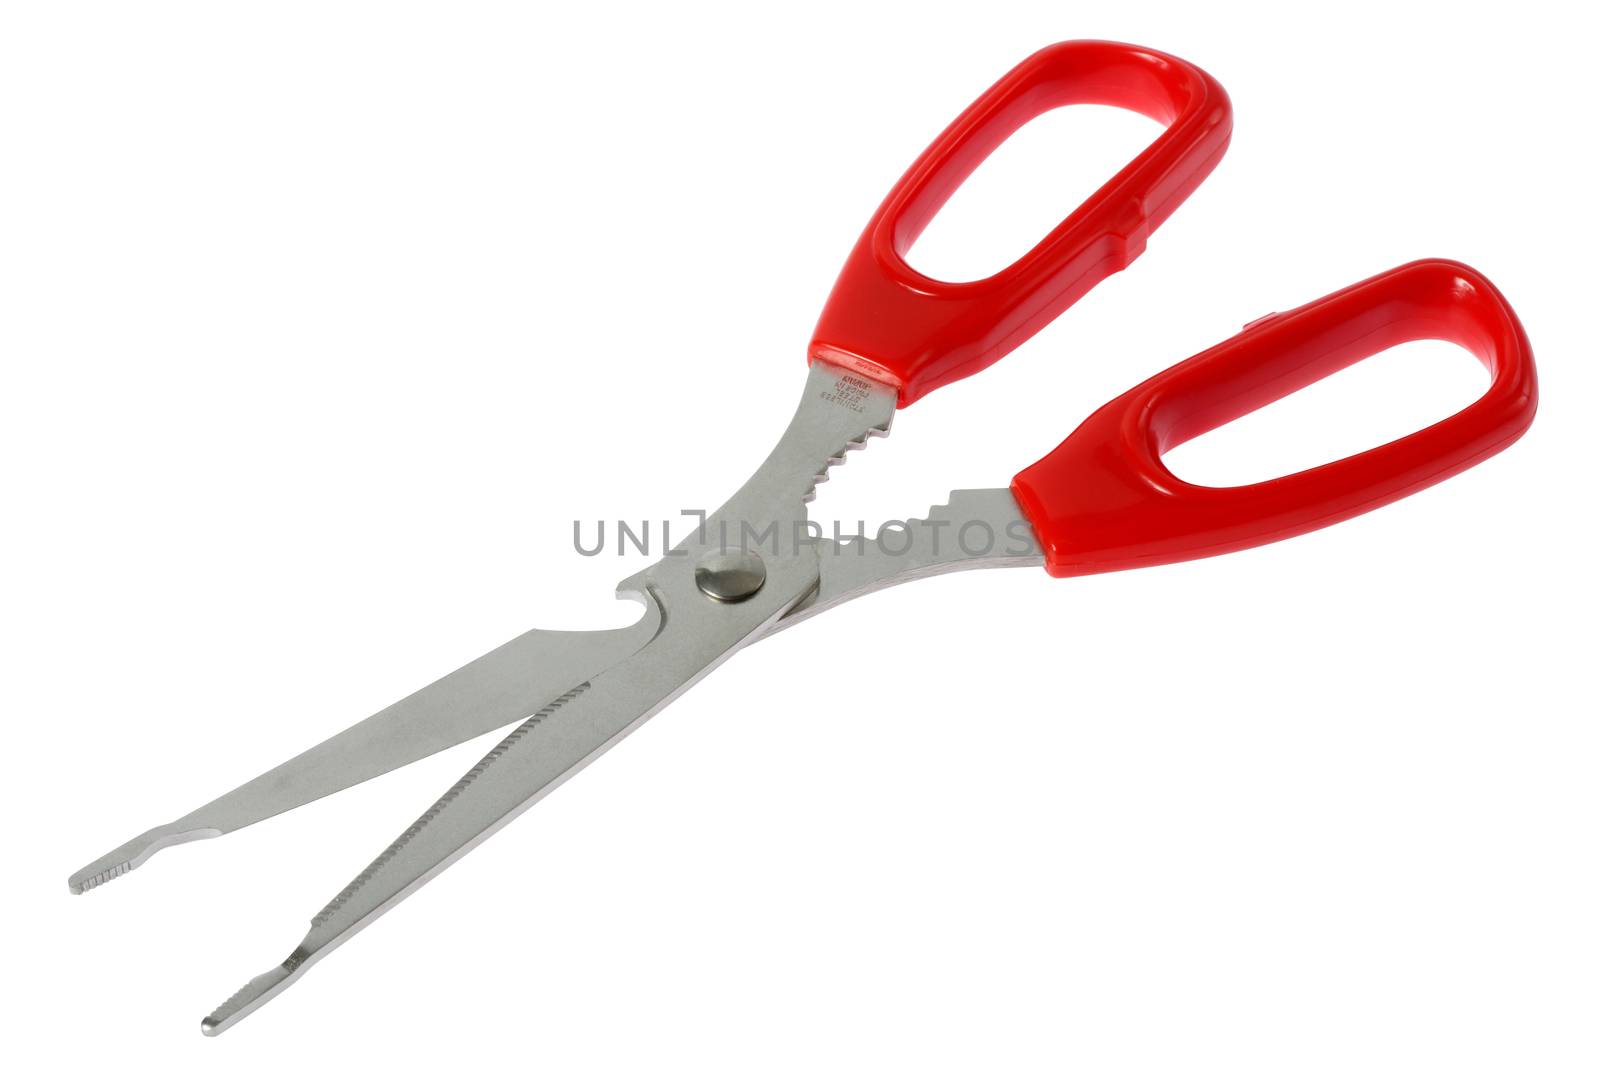 general purpose scissor isolated on white background with clipping path 